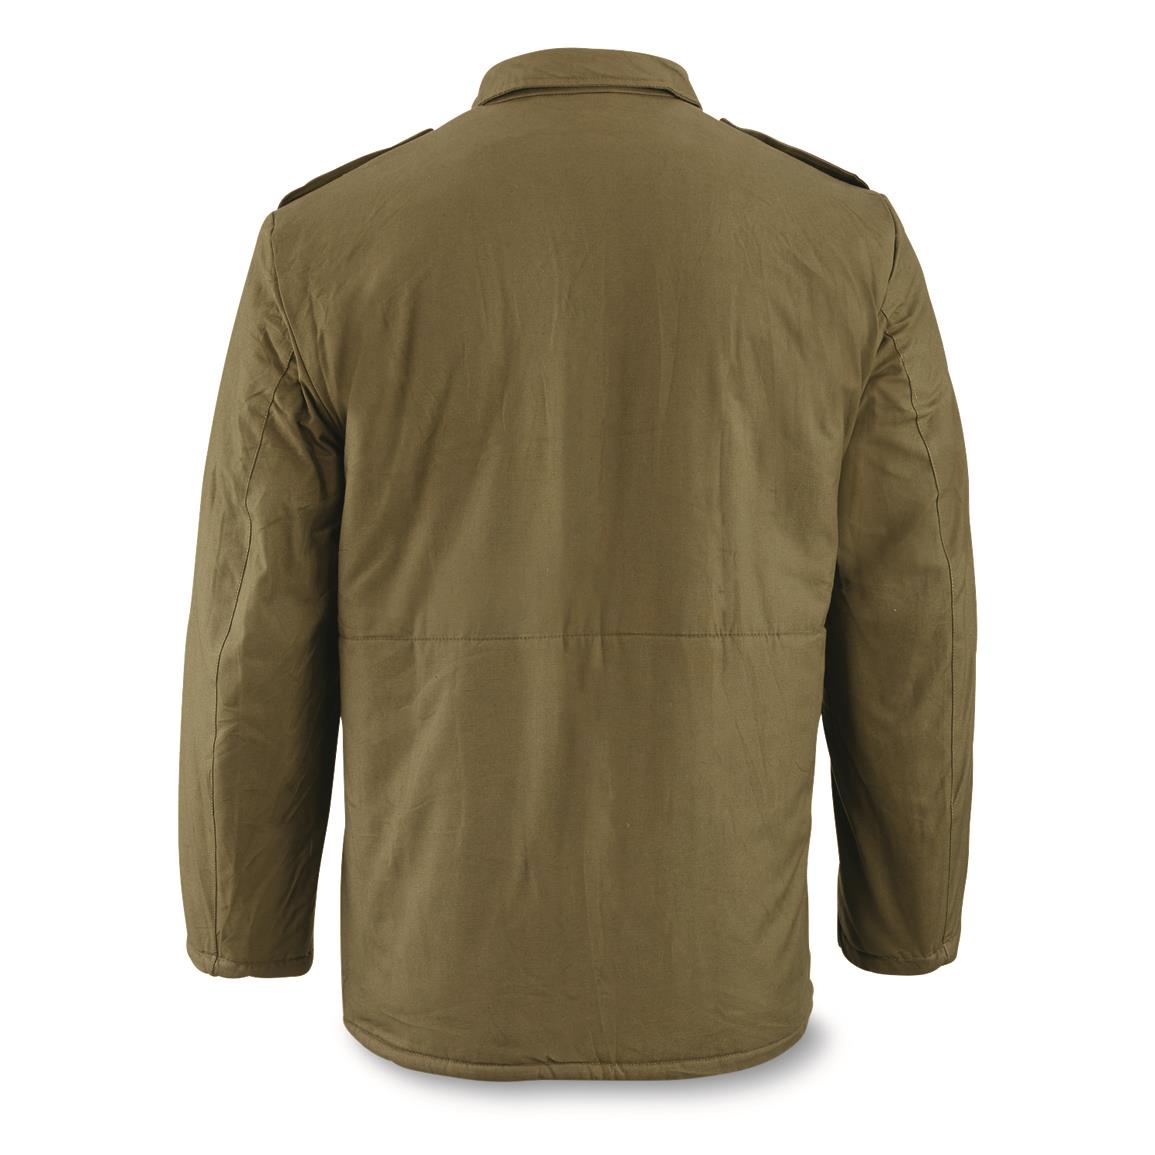 Military Surplus Quilted Jacket | Sportsman's Guide